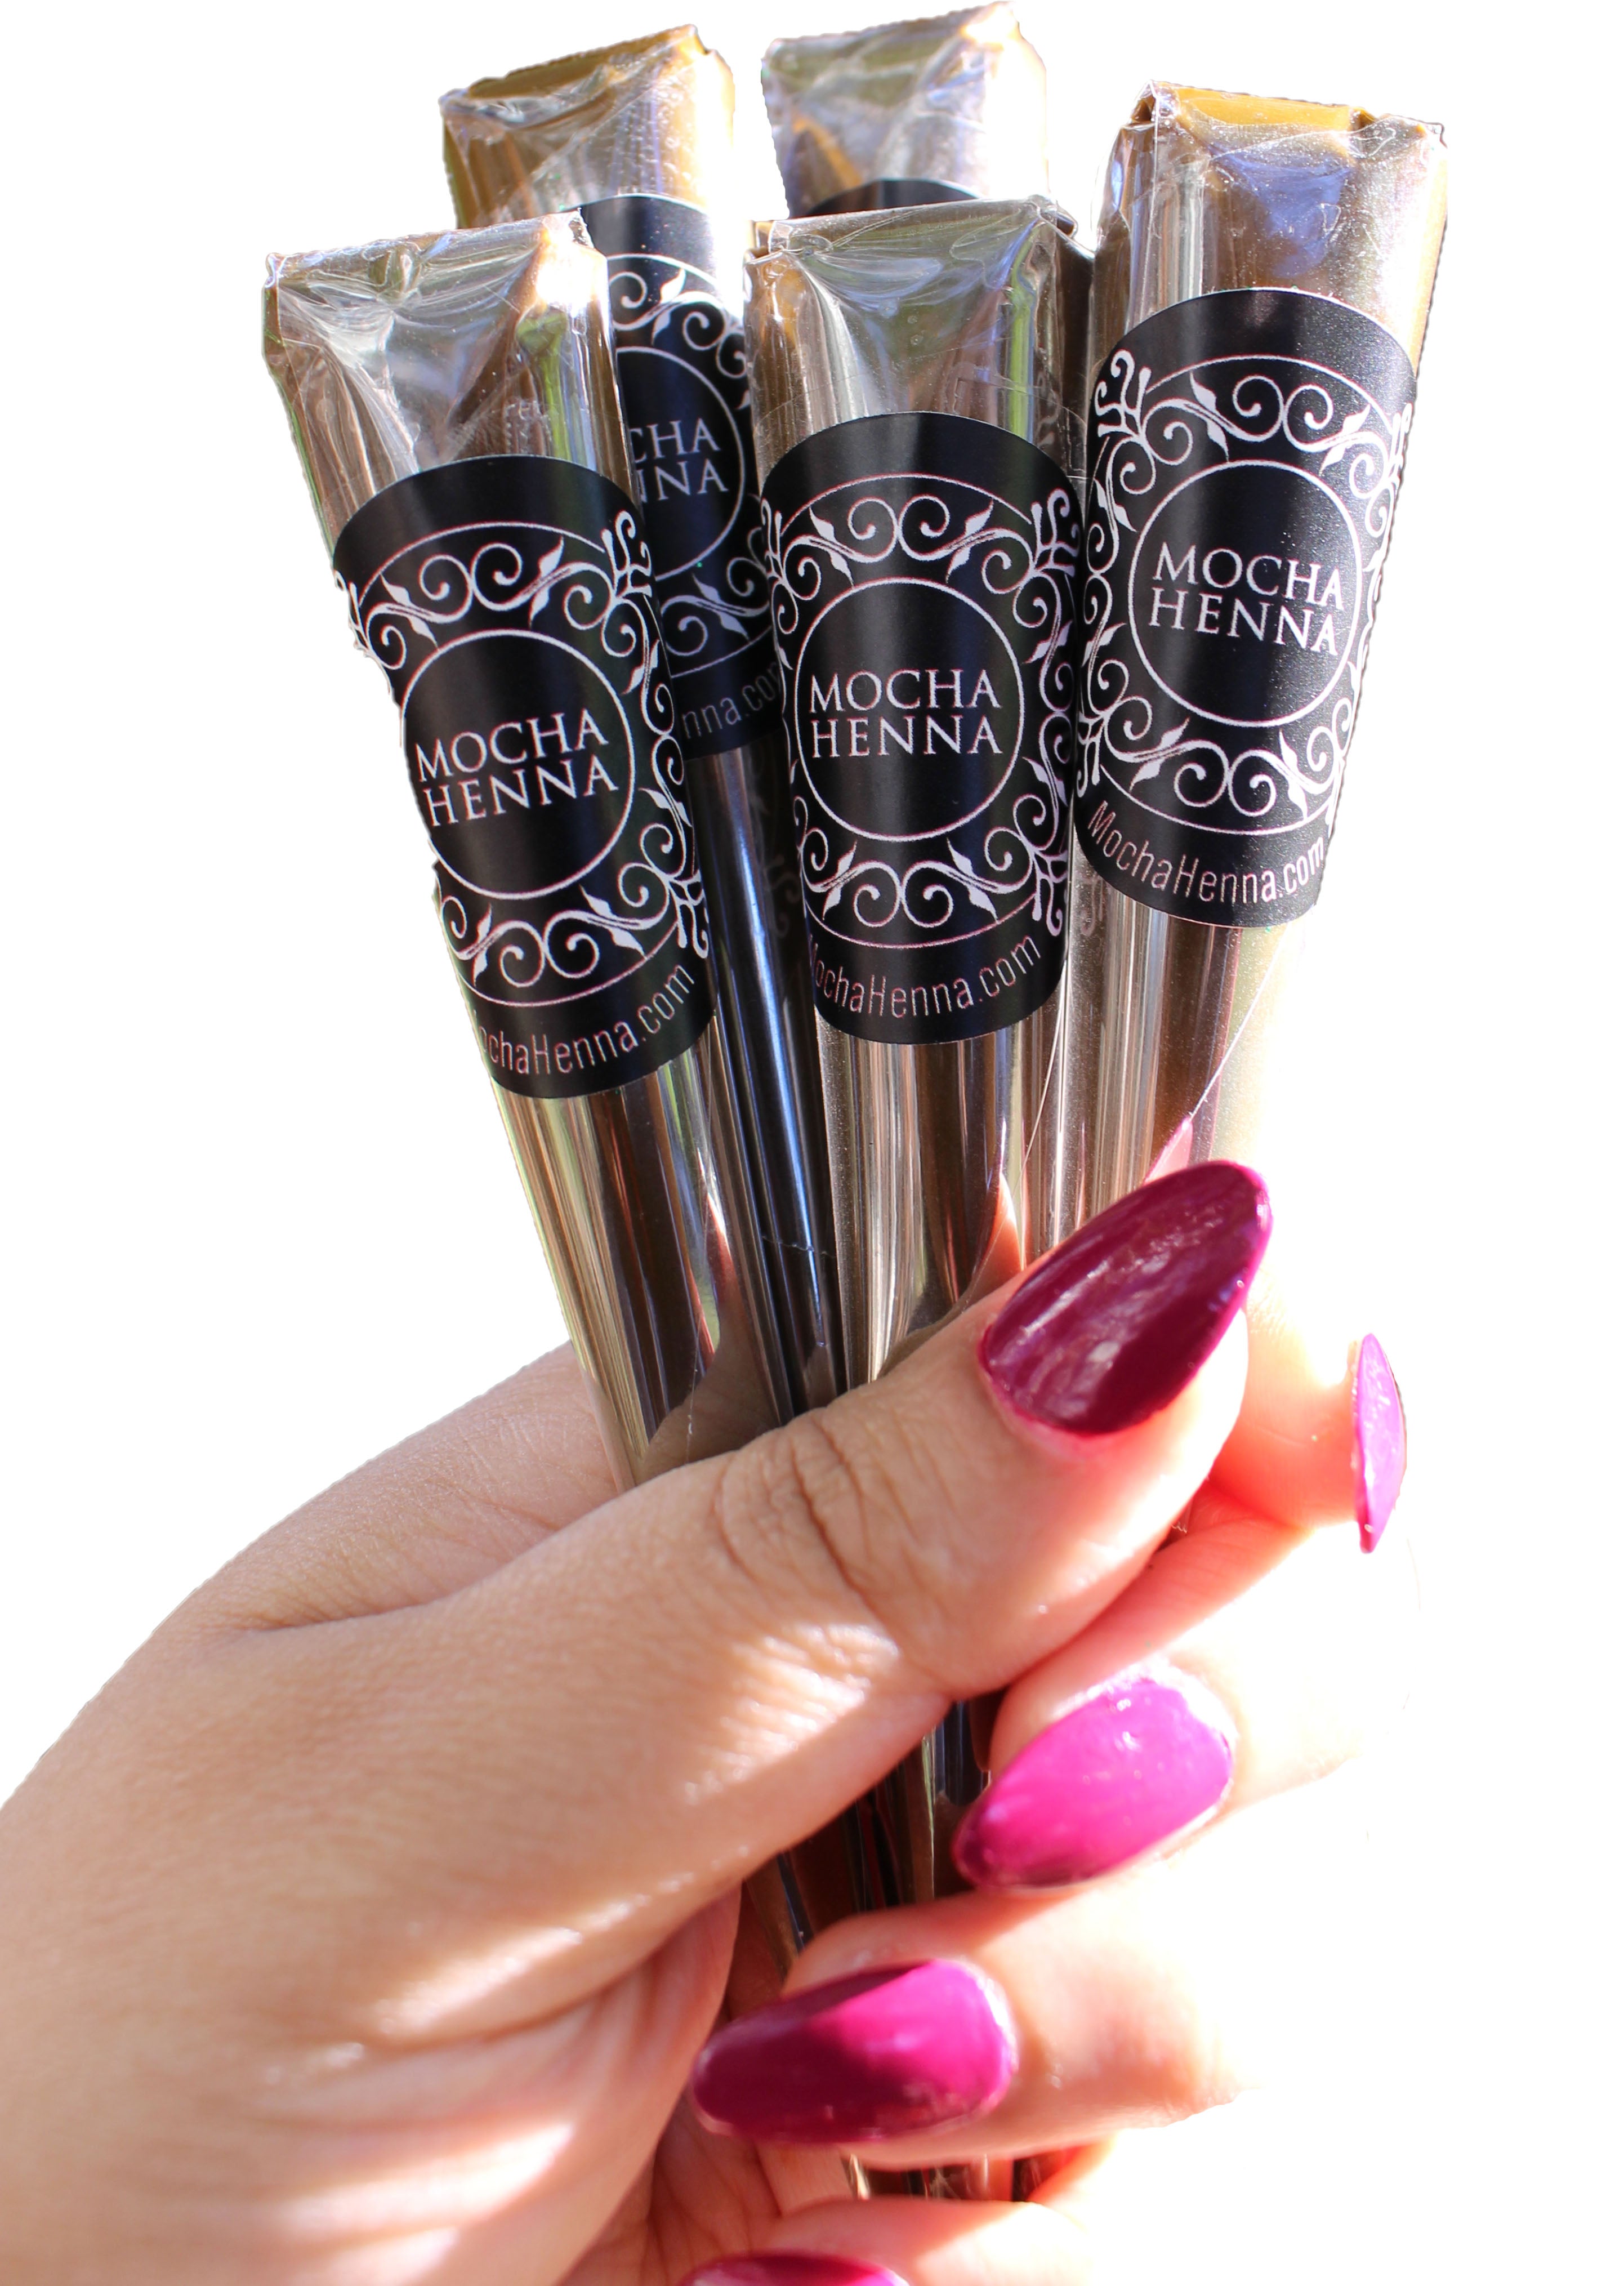 4 PACK OF 100% Natural Henna Cones